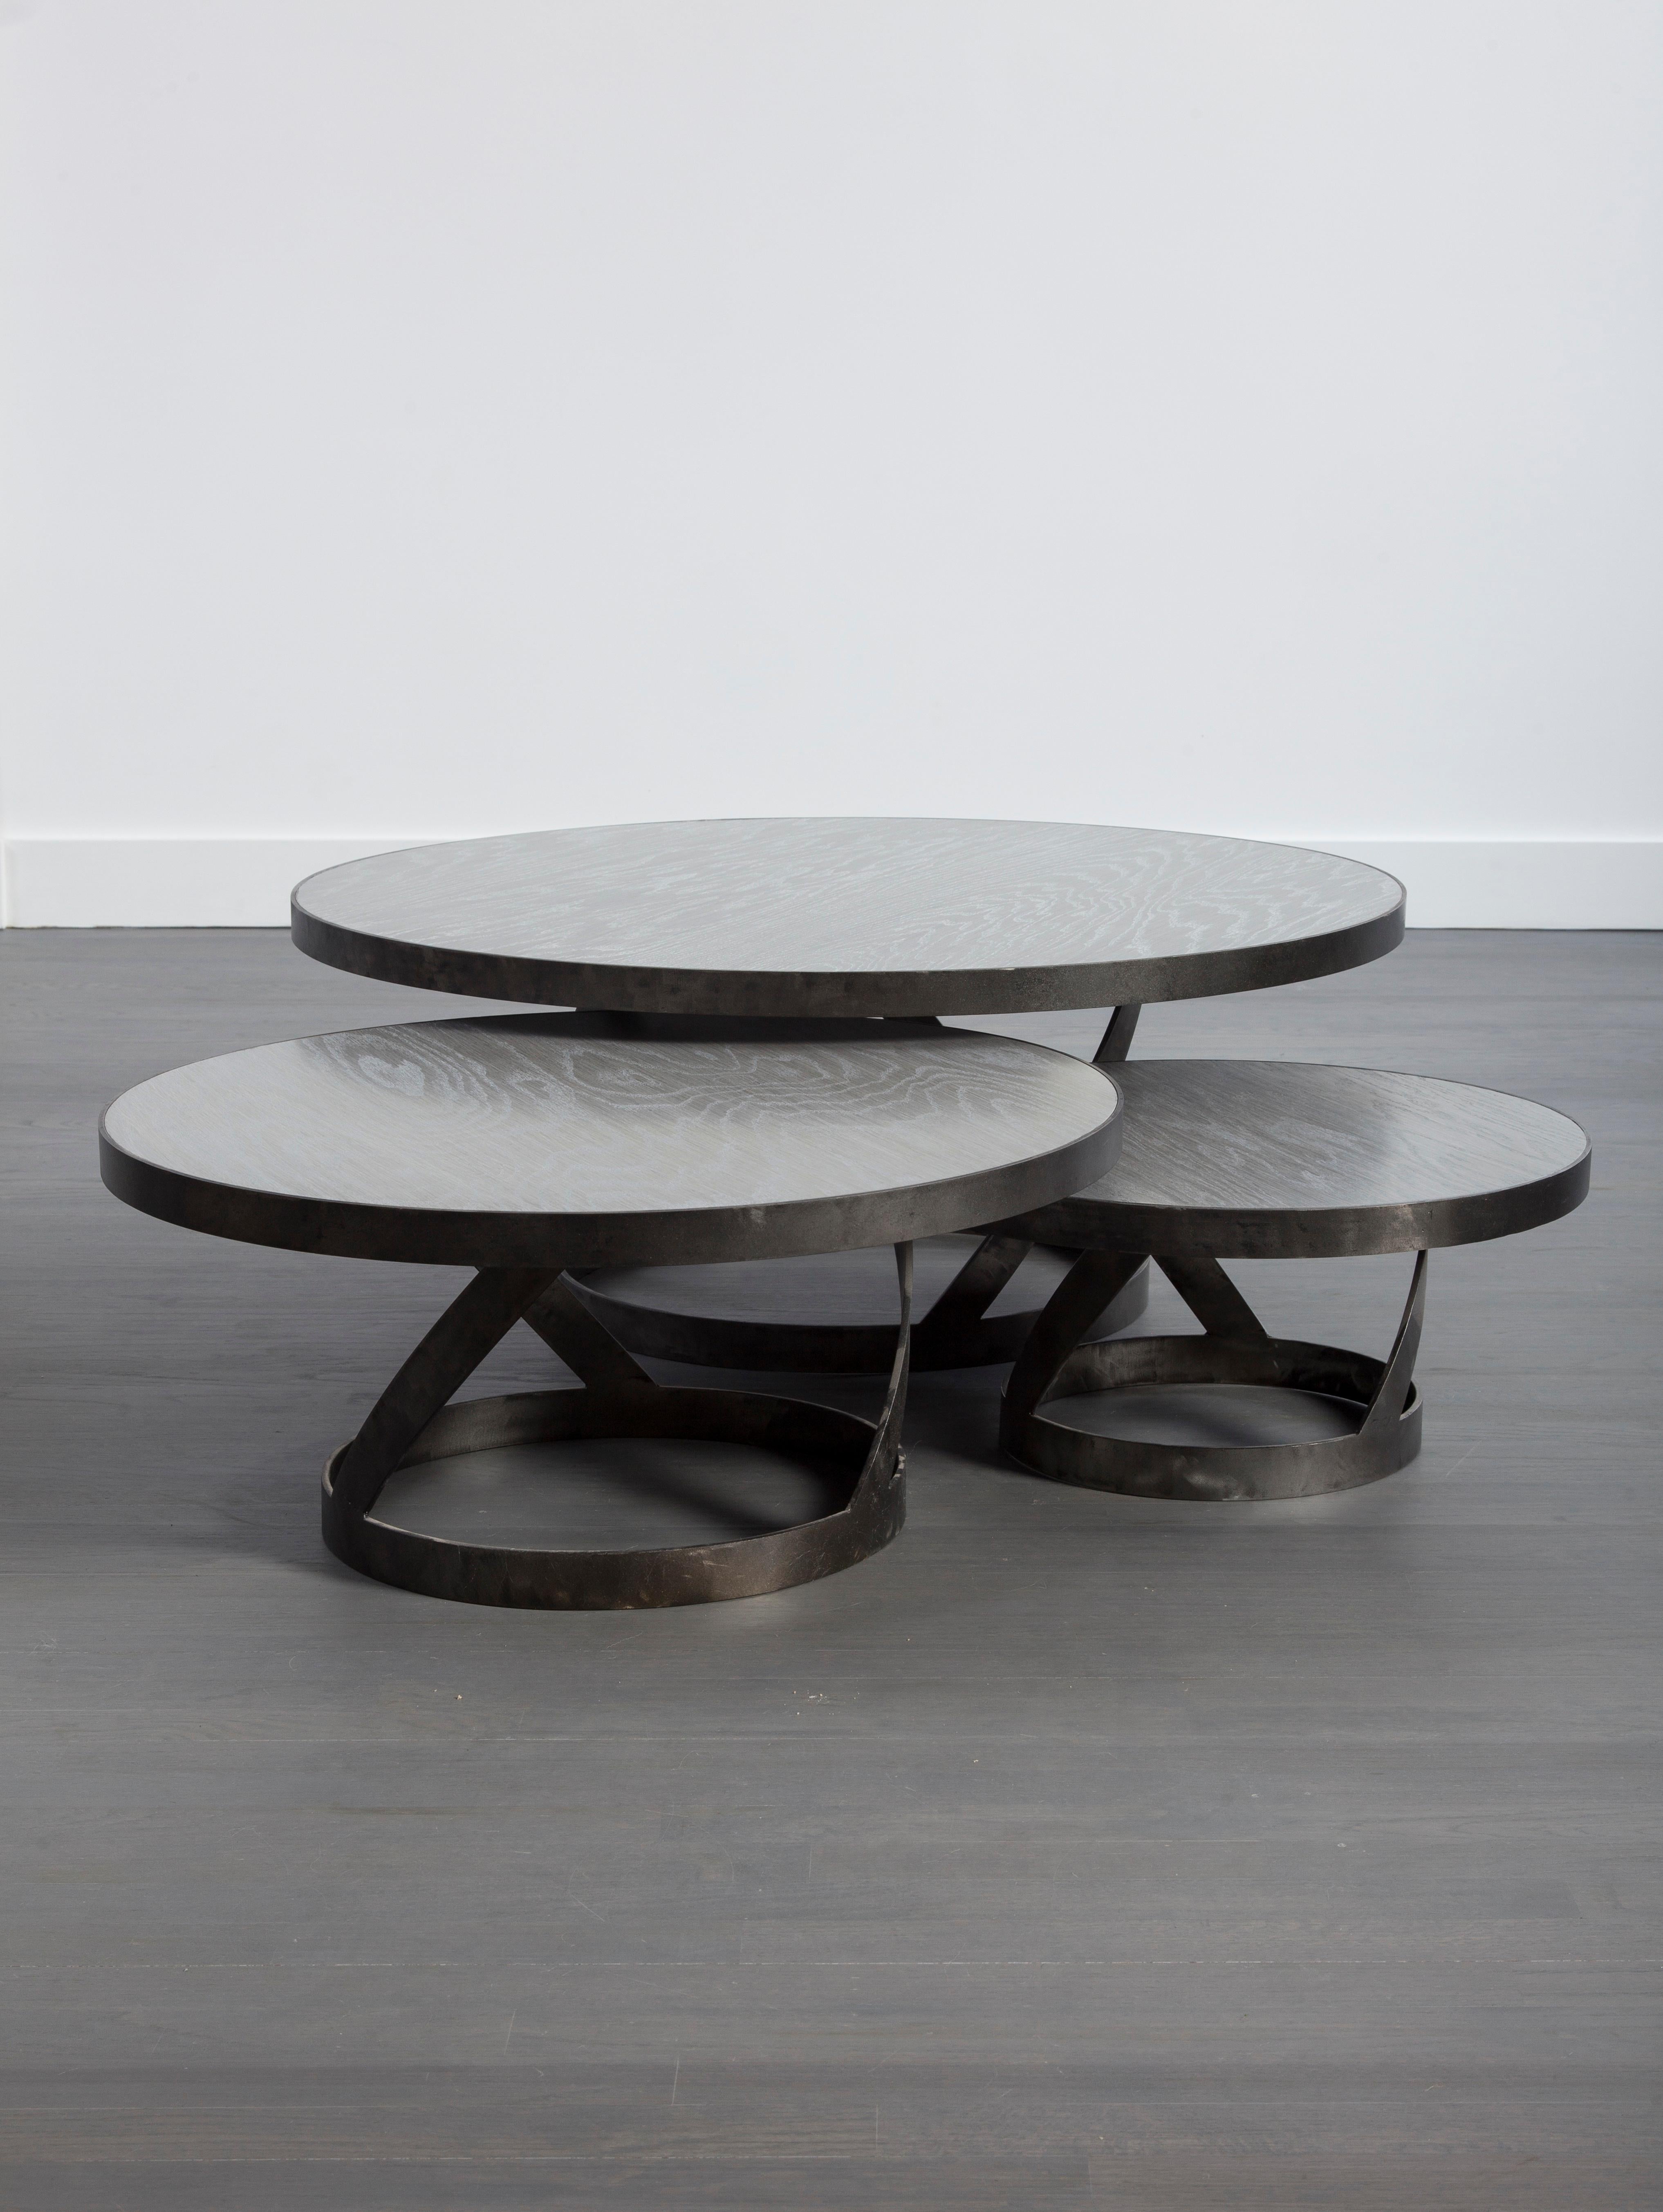 This versatile modern oak coffee table with a blackened steel spiral base provides great interest for the family or living room. Shown is the 31 inch diameter table top. The table also comes in 42 and 24 inch diameters and varying heights,